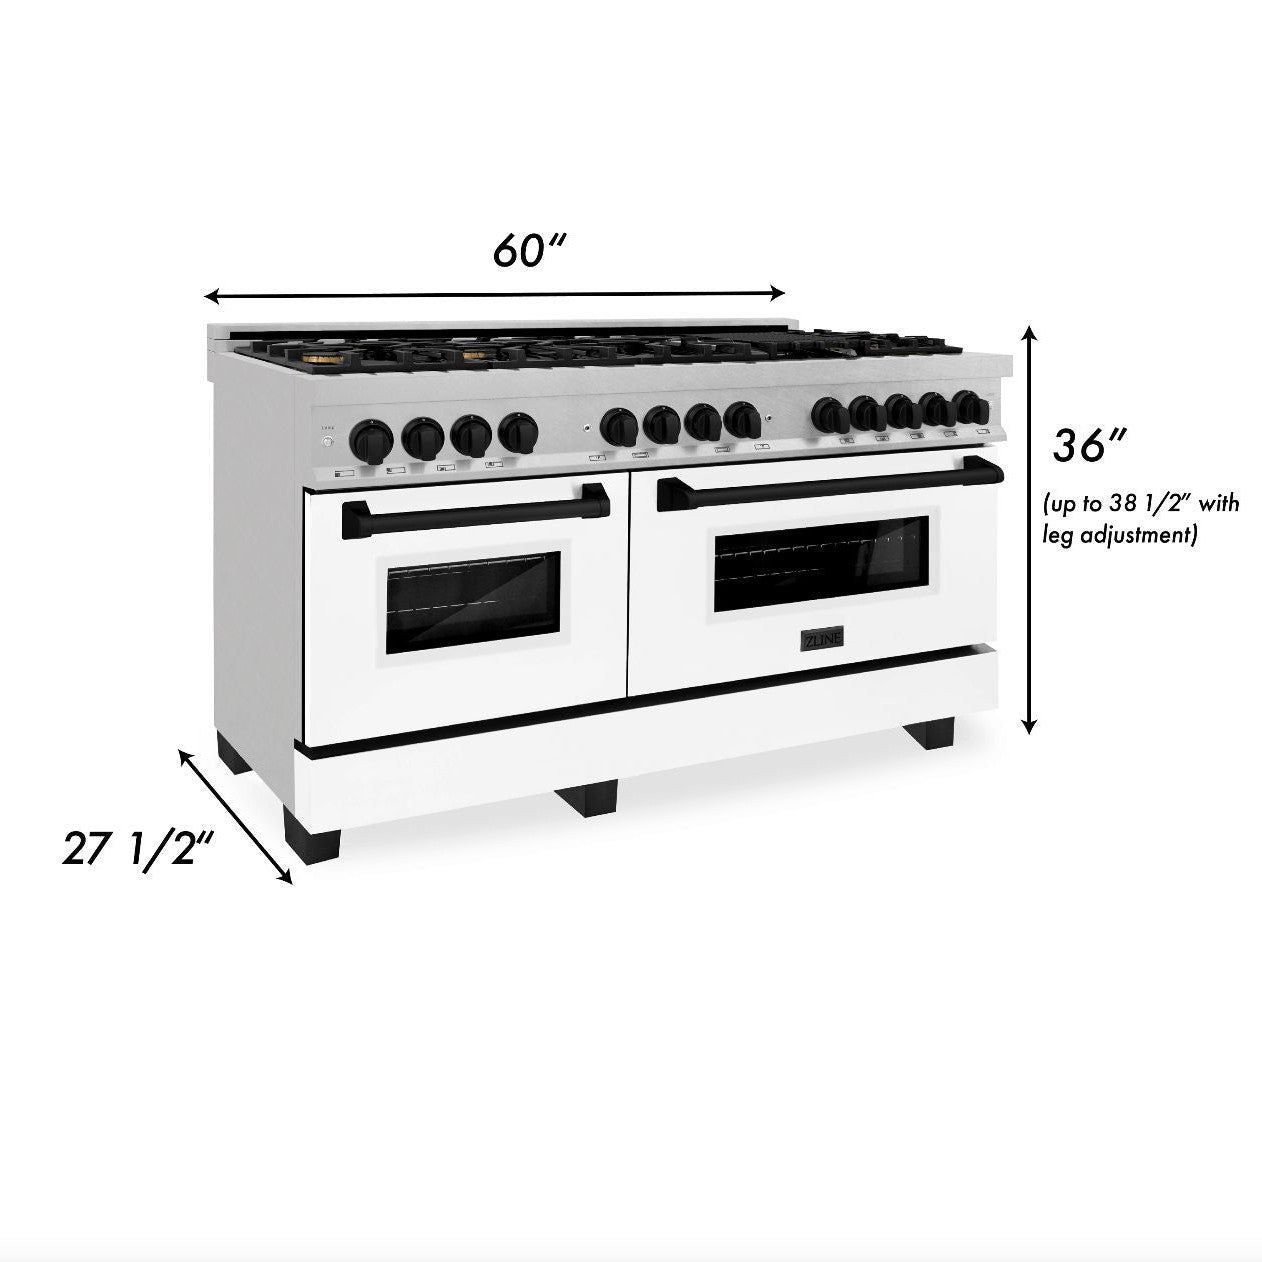 ZLINE Autograph Edition 60" 7.4 cu. ft. Dual Fuel Range with Gas Stove and Electric Oven in Stainless Steel with White Matte Door and Accents (RAZ-WM-60-MB)